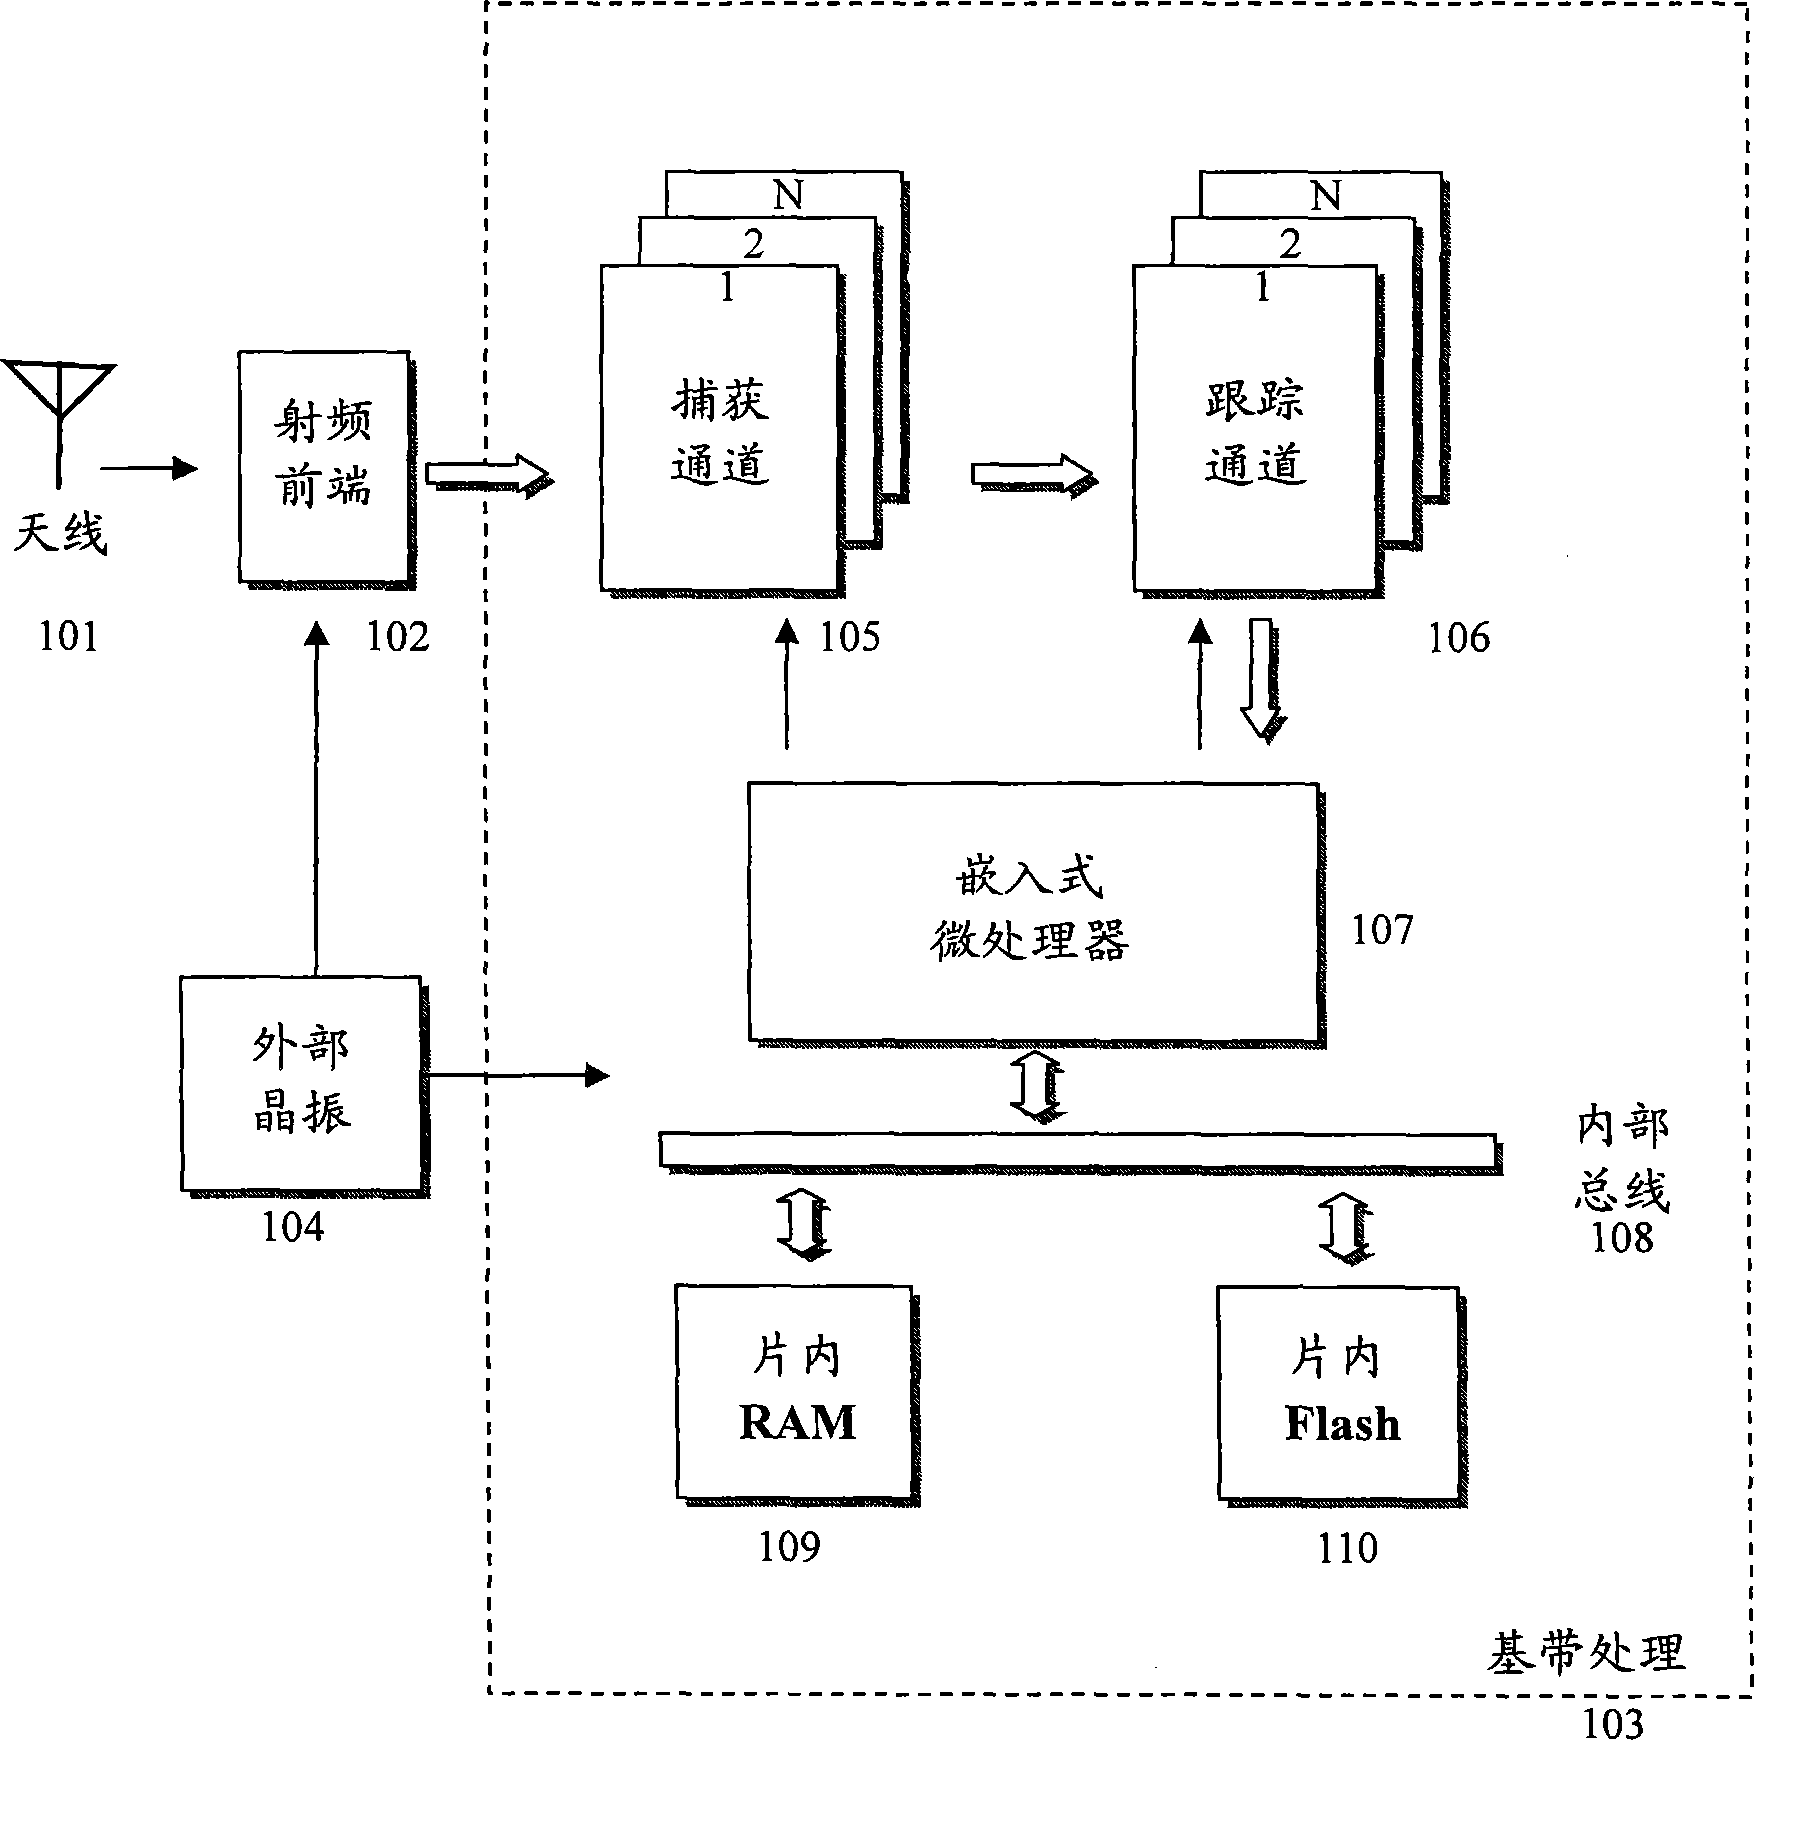 Continuous tracing and positioning method for global positioning system receiver in signal lack condition